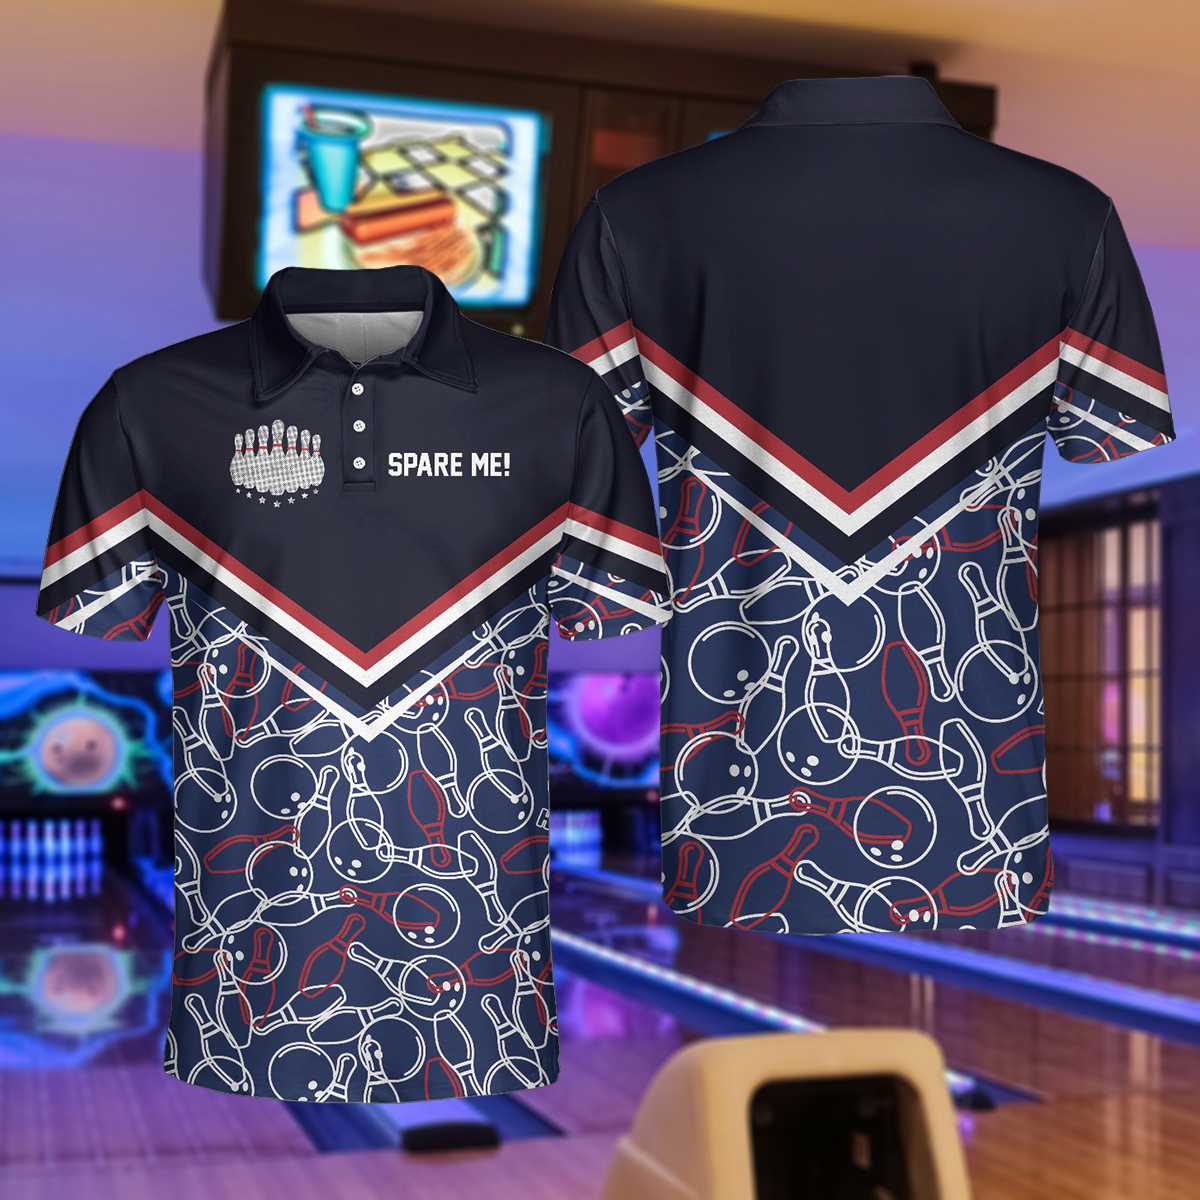 Spare Me Bowling Short Sleeve Polo Shirt/ Bowling Ball And Pin Pattern Polo Shirt/ Best Bowling Shirt For Men Coolspod